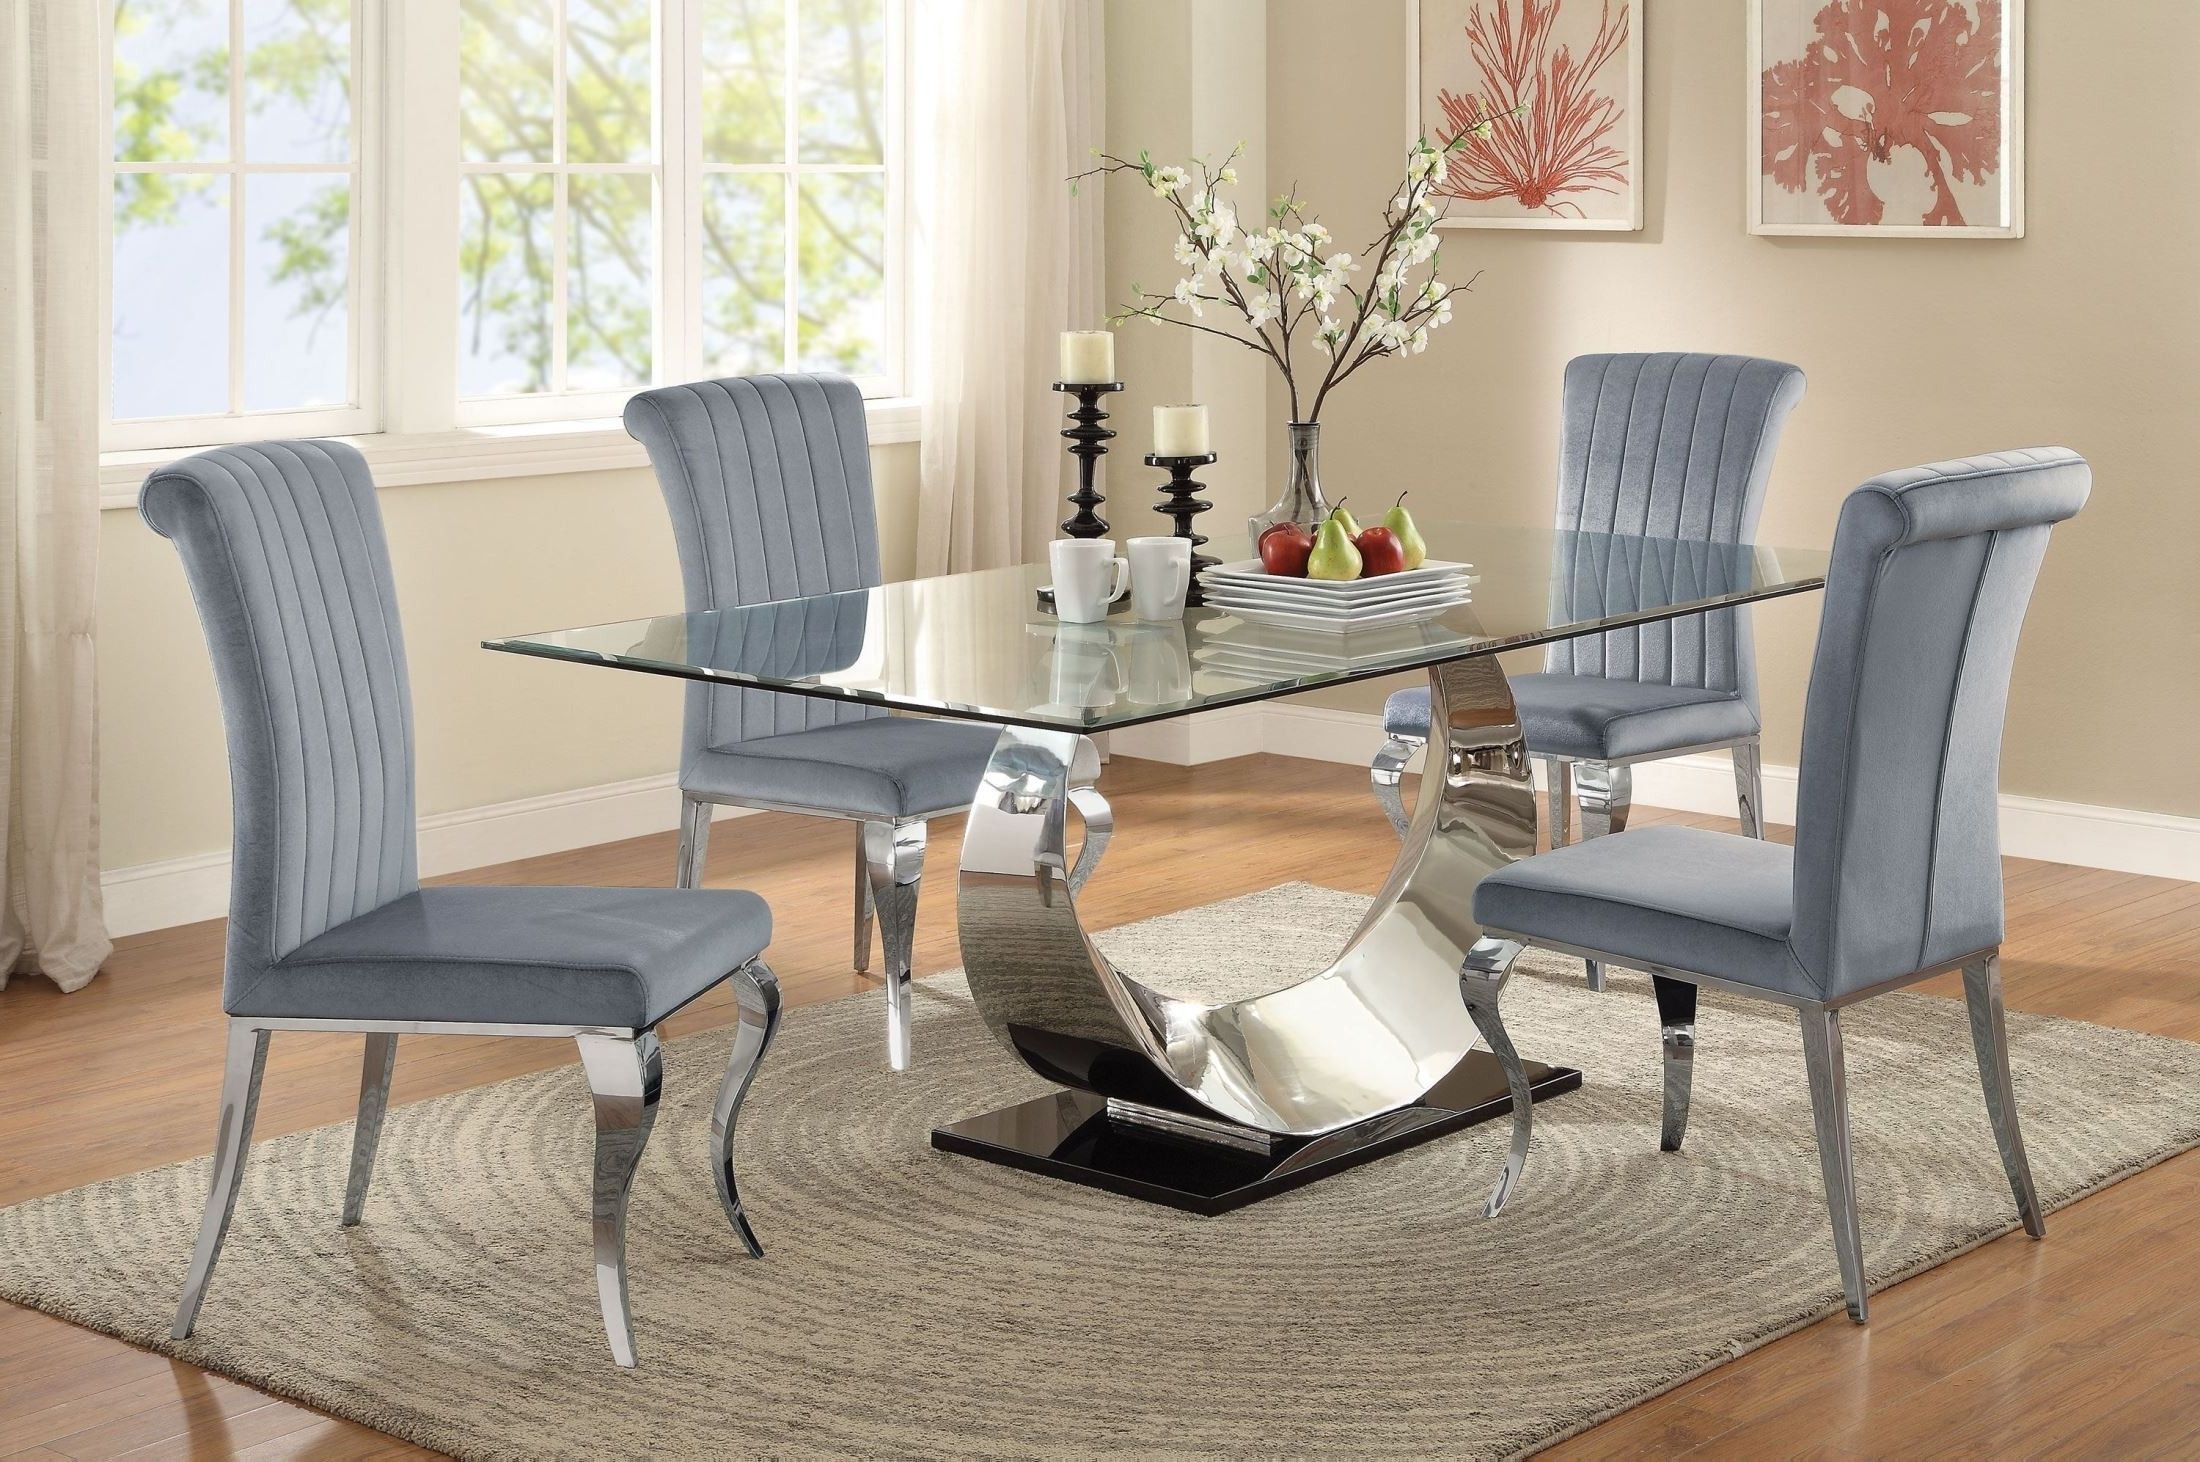 Famous Chrome Dining Room Chairs Regarding Coaster Manessier Chrome Dining Room Set – Manessier Collection:  (View 2 of 25)